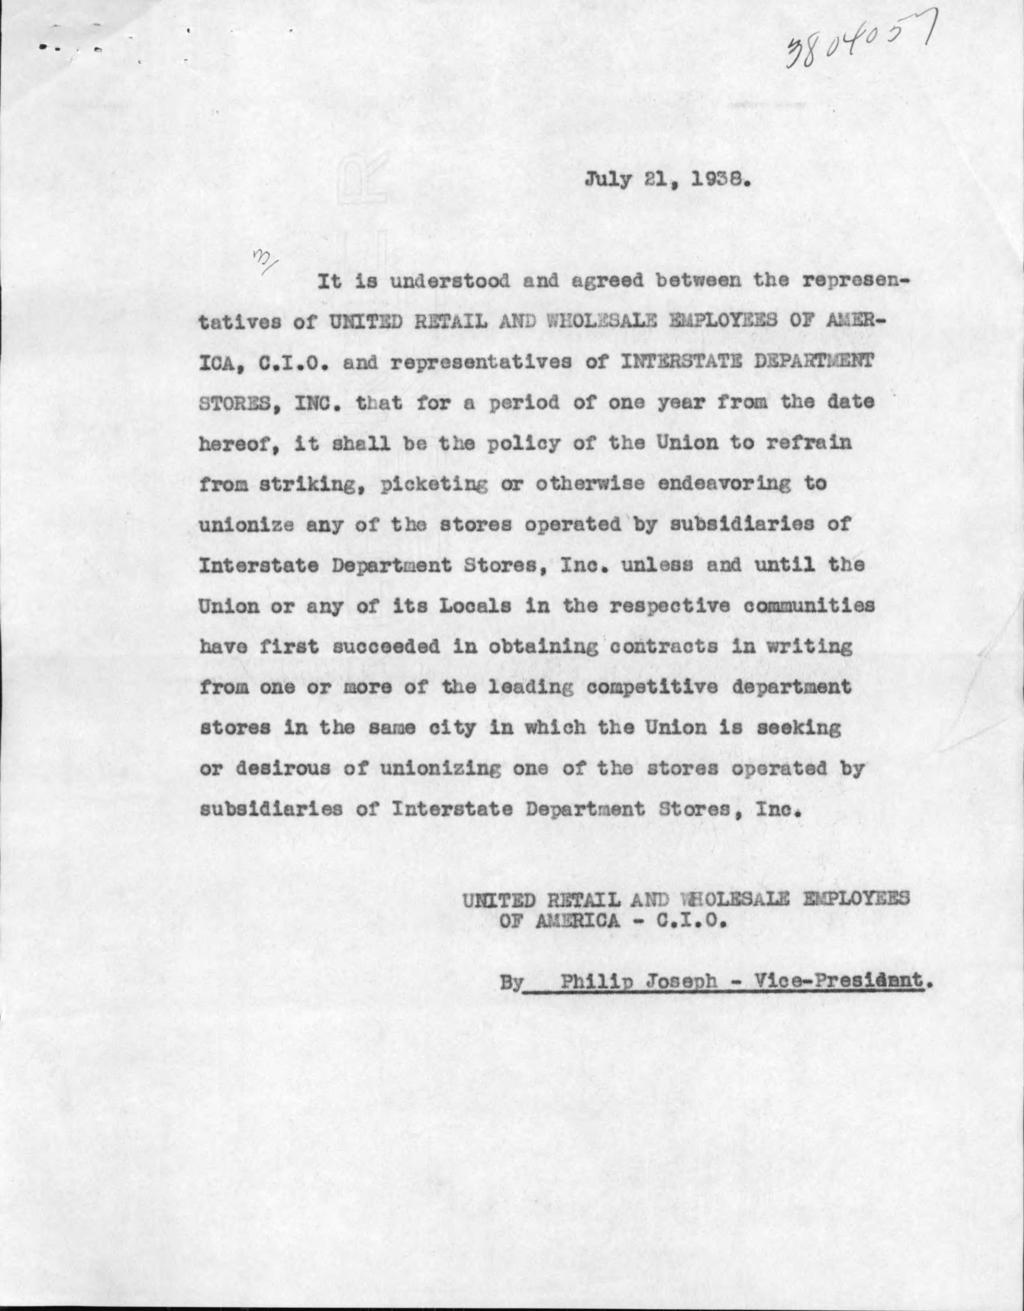 July 21, 1958 y It ia understood and agreed between the representative a of UNITS!) RETAIL AND WHOLESALE EMPLOYEES OF AMER ICA, C.I.O. and representatives of INTERSTATE DEPARTMENT STORES, INC.